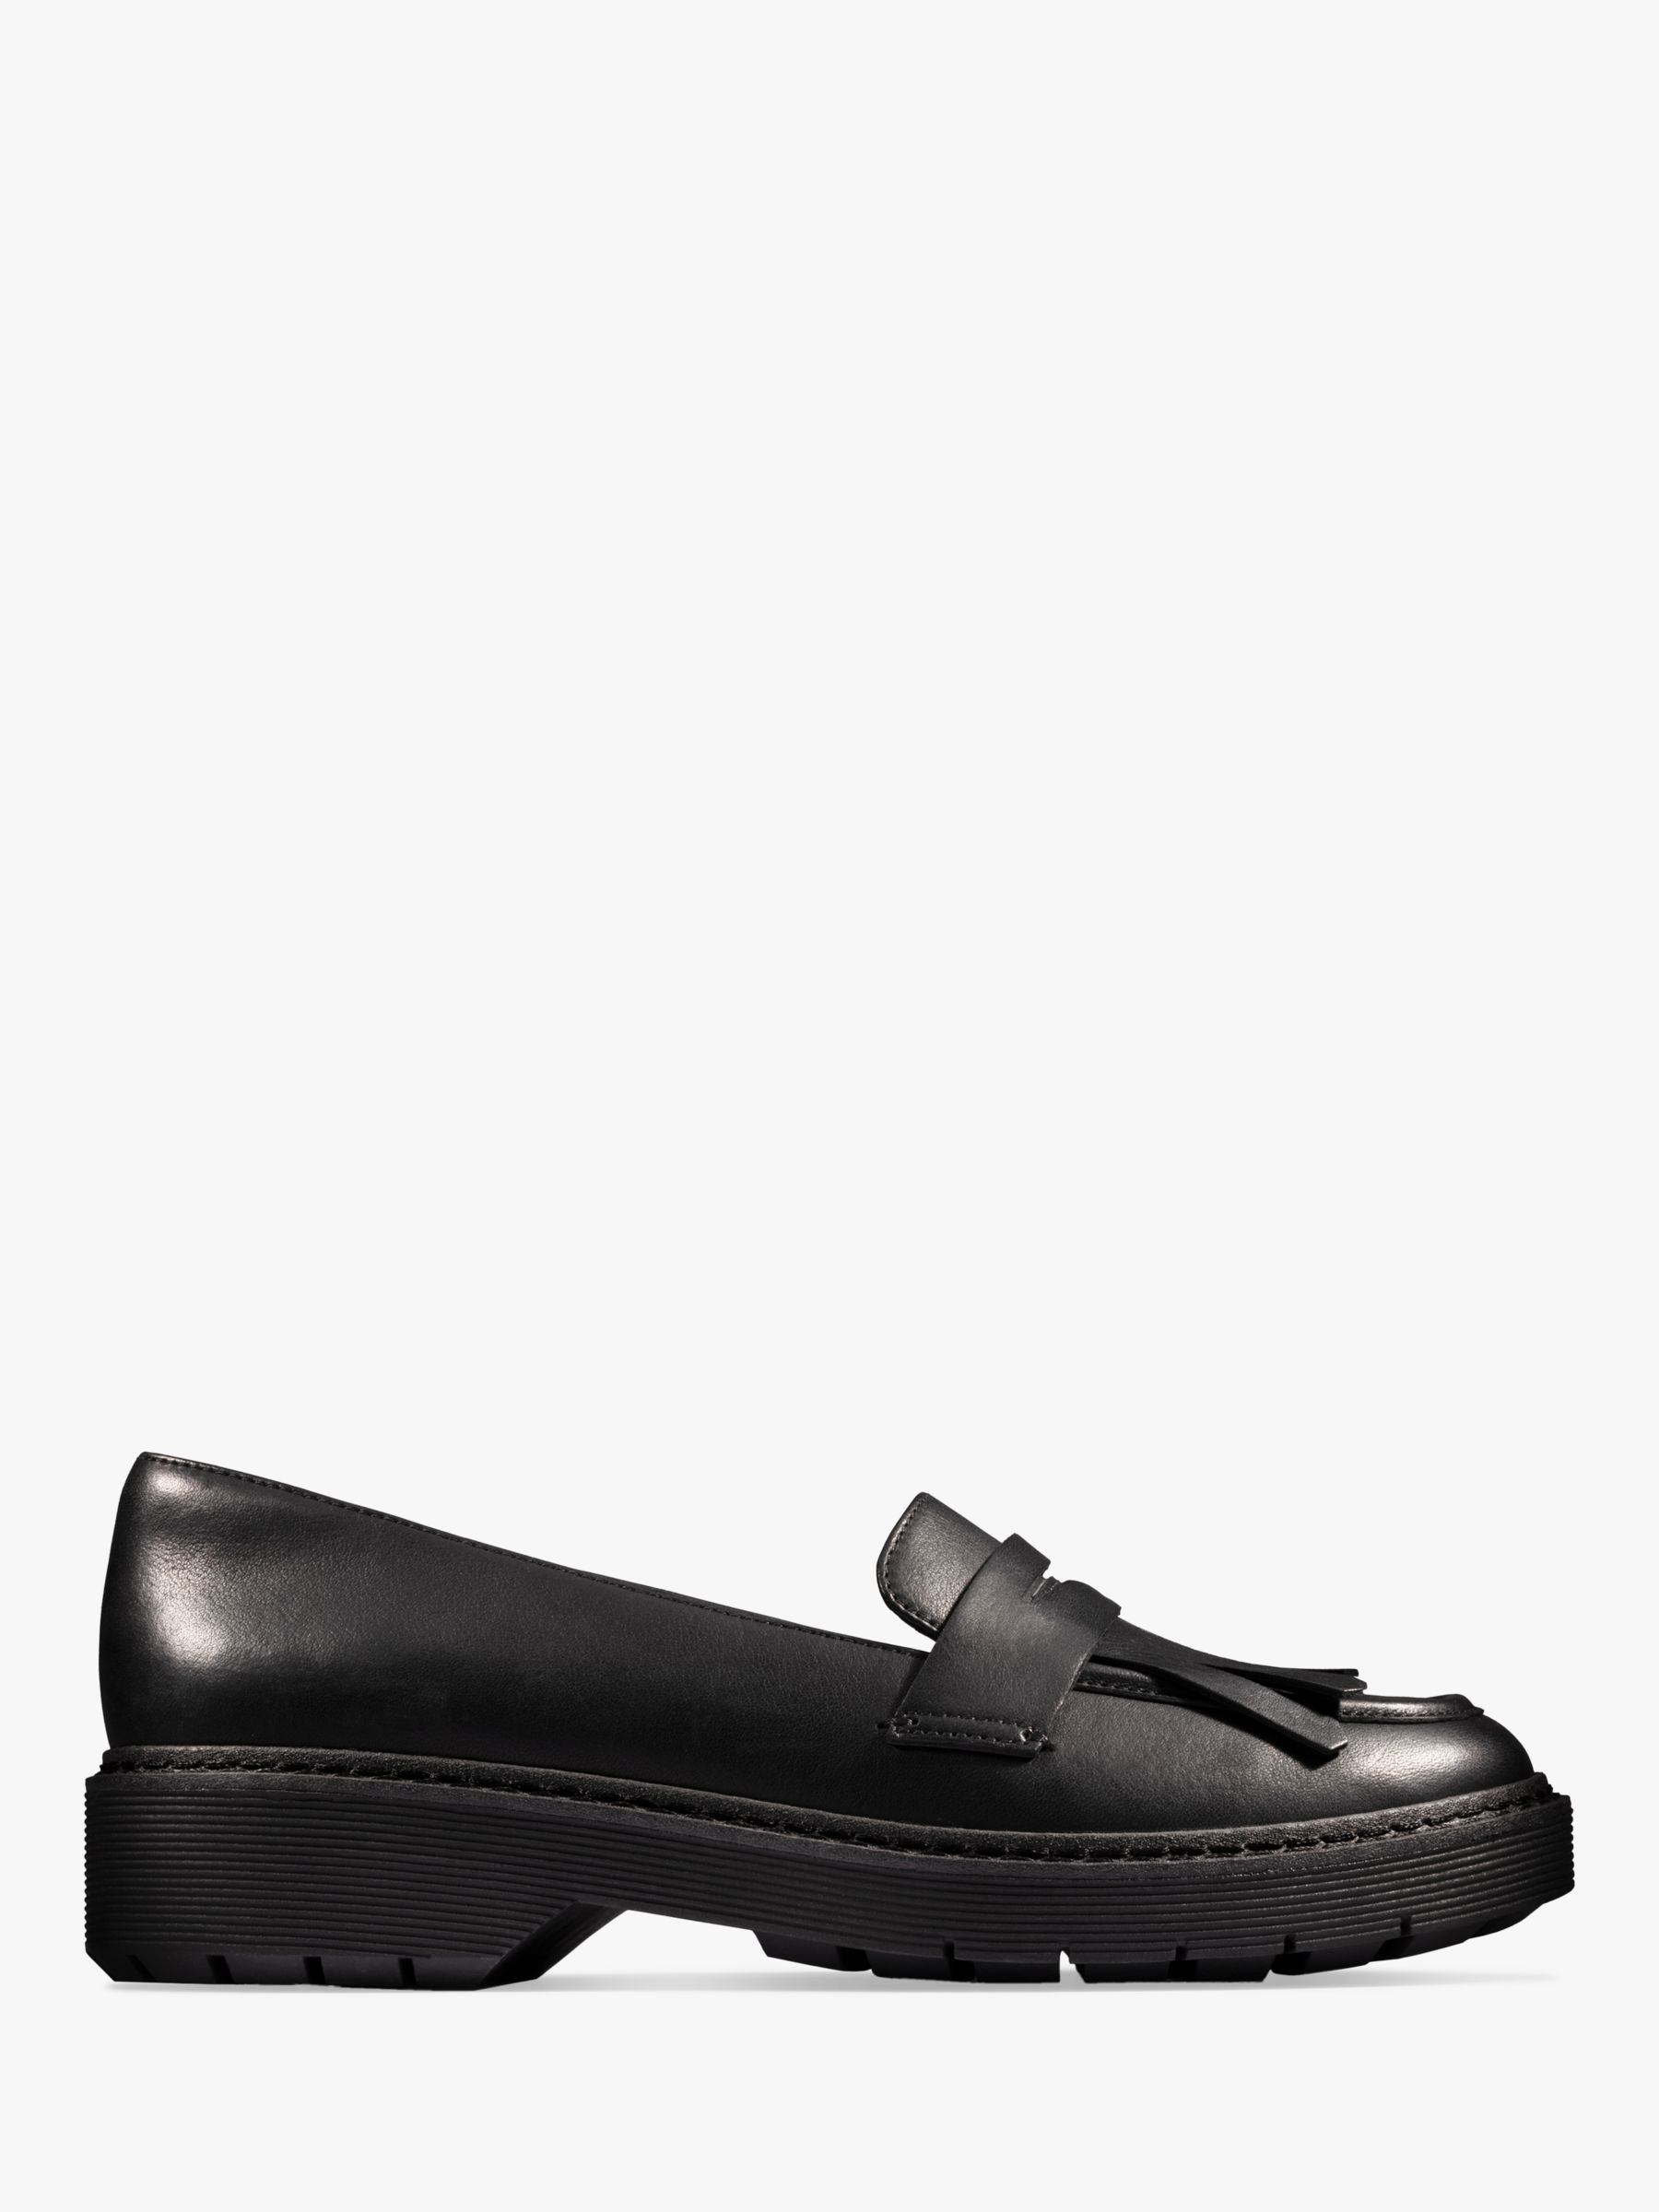 Clarks Witcombe Dawn Leather Tassel Loafer, Black at John Lewis & Partners